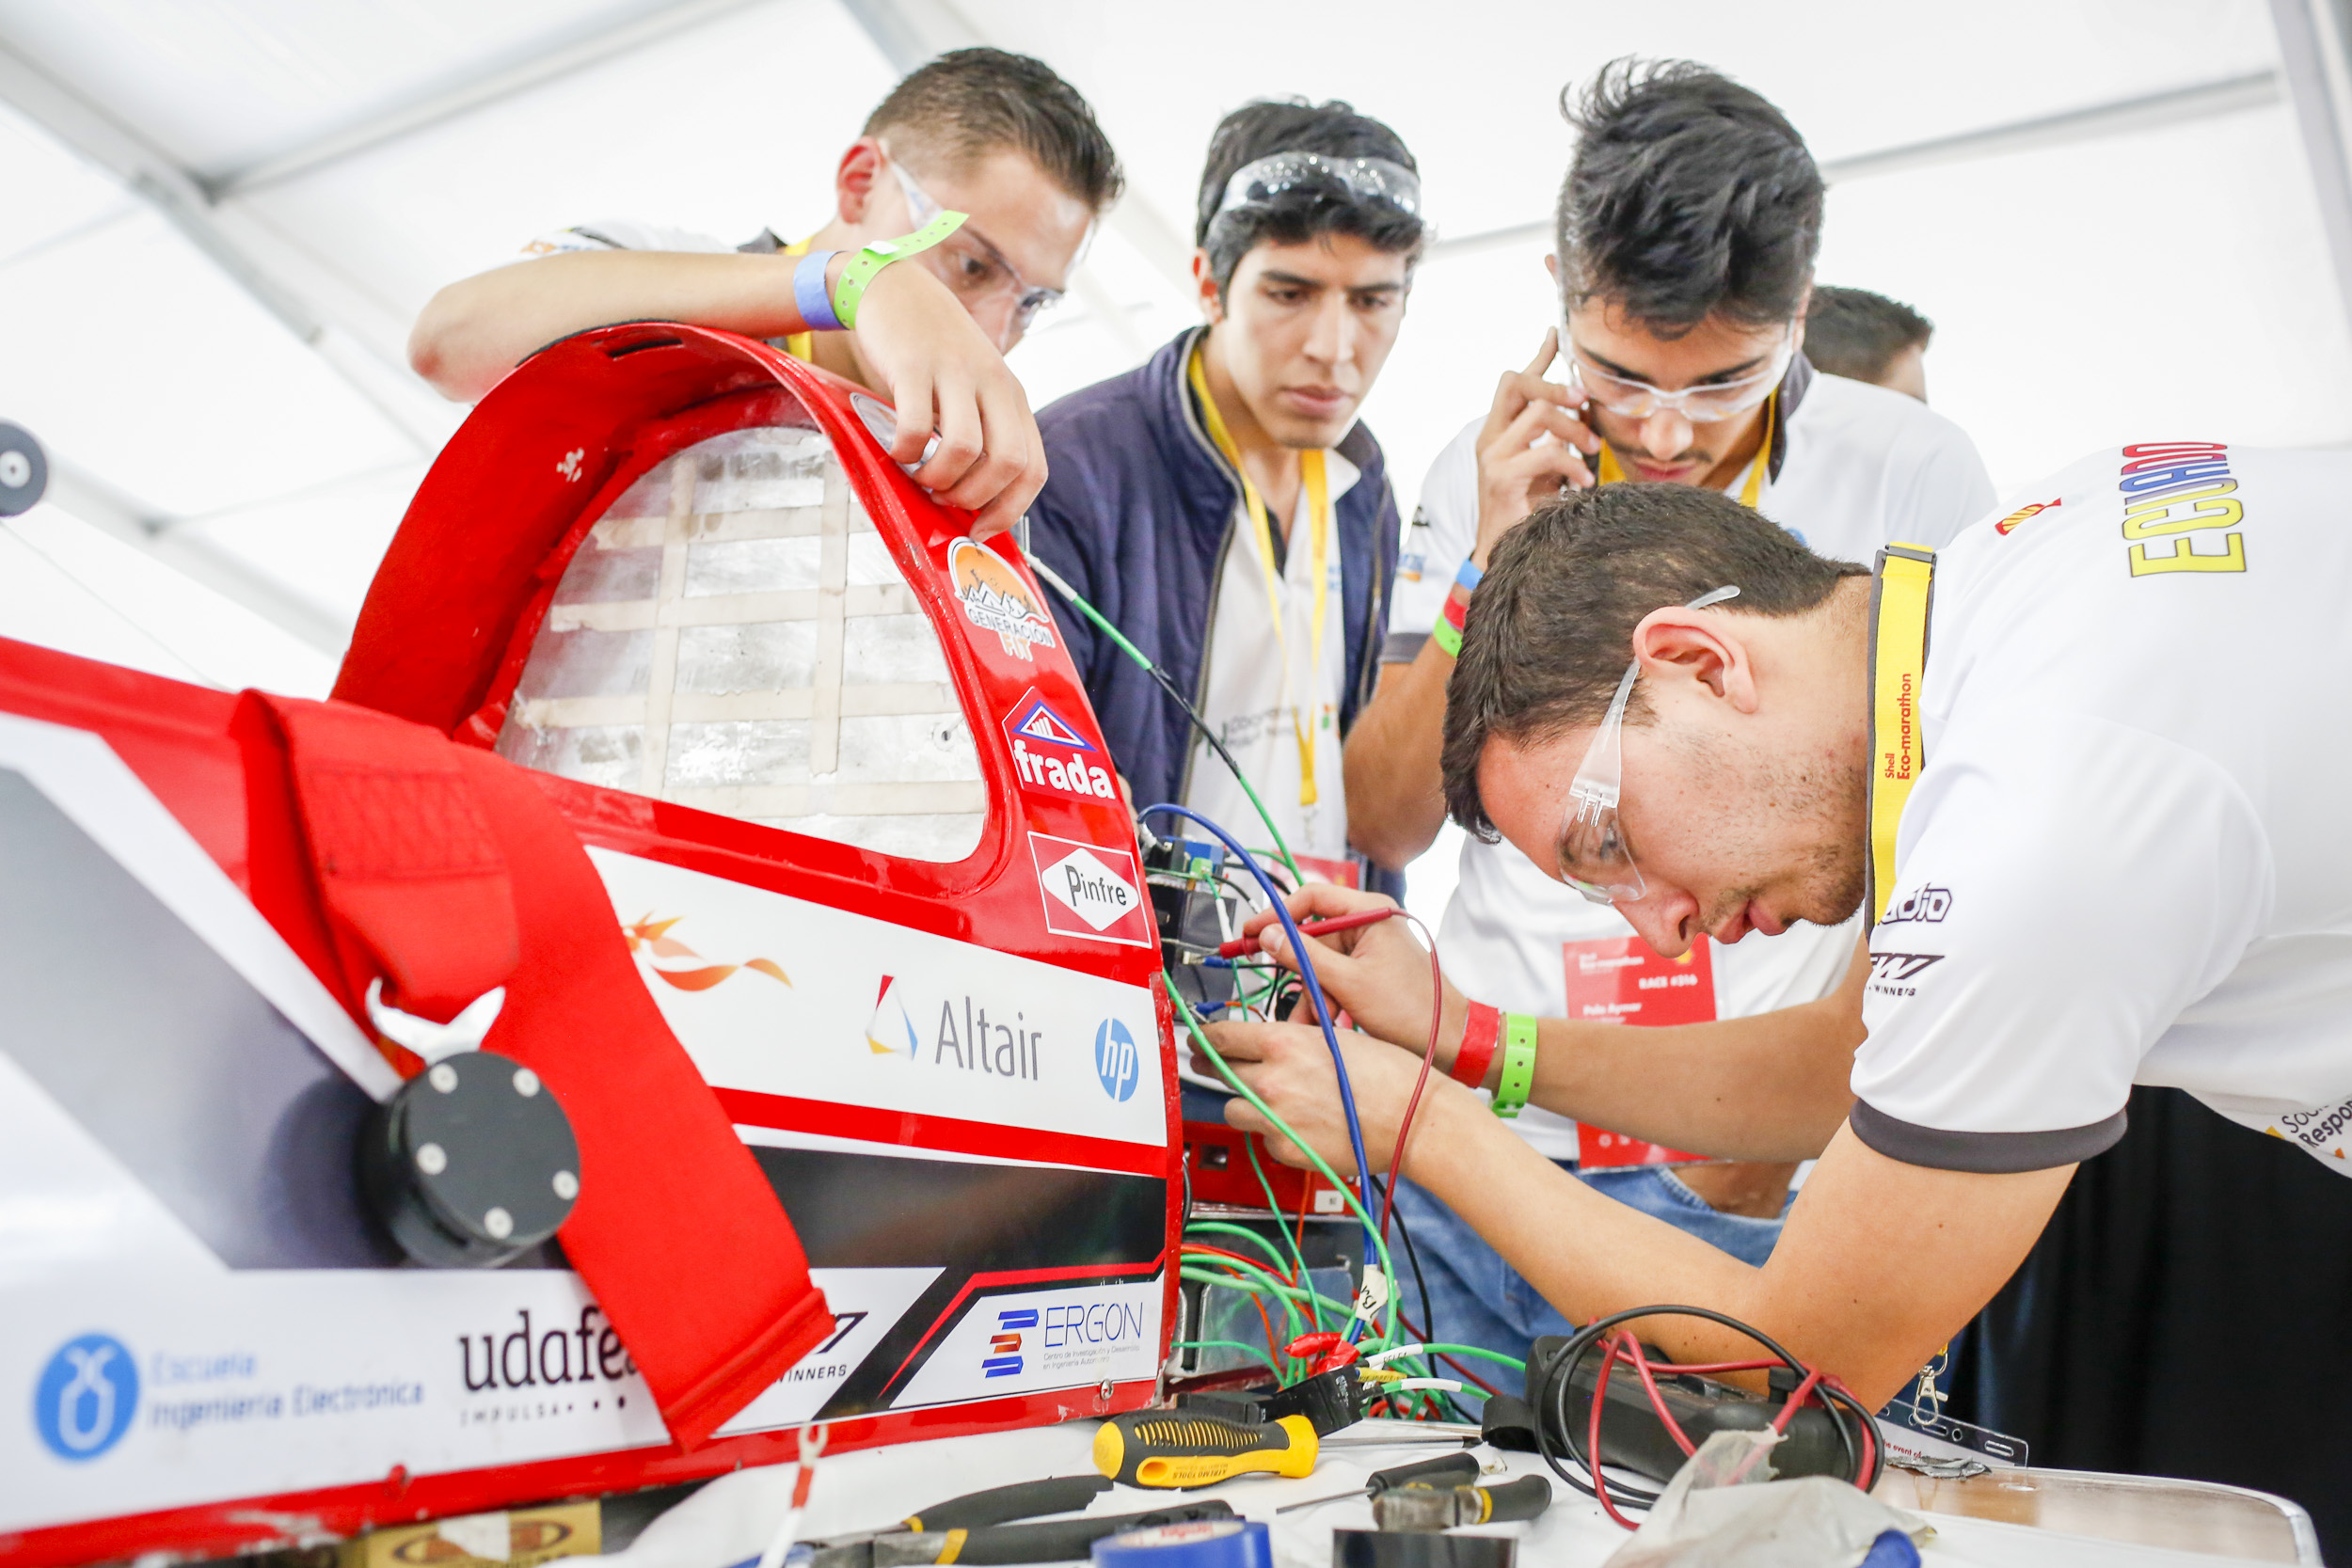  Team&nbsp; #316, &nbsp;E-Team UDA Elec, of Universidad del Azuay, in Cuenca, Azuay, Ecuador, Prototype, Battery Electric work on their car in the paddock during day one of Shell Make the Future at Sonoma Raceway, Thursday, April 19, 2018 in Sonoma, 